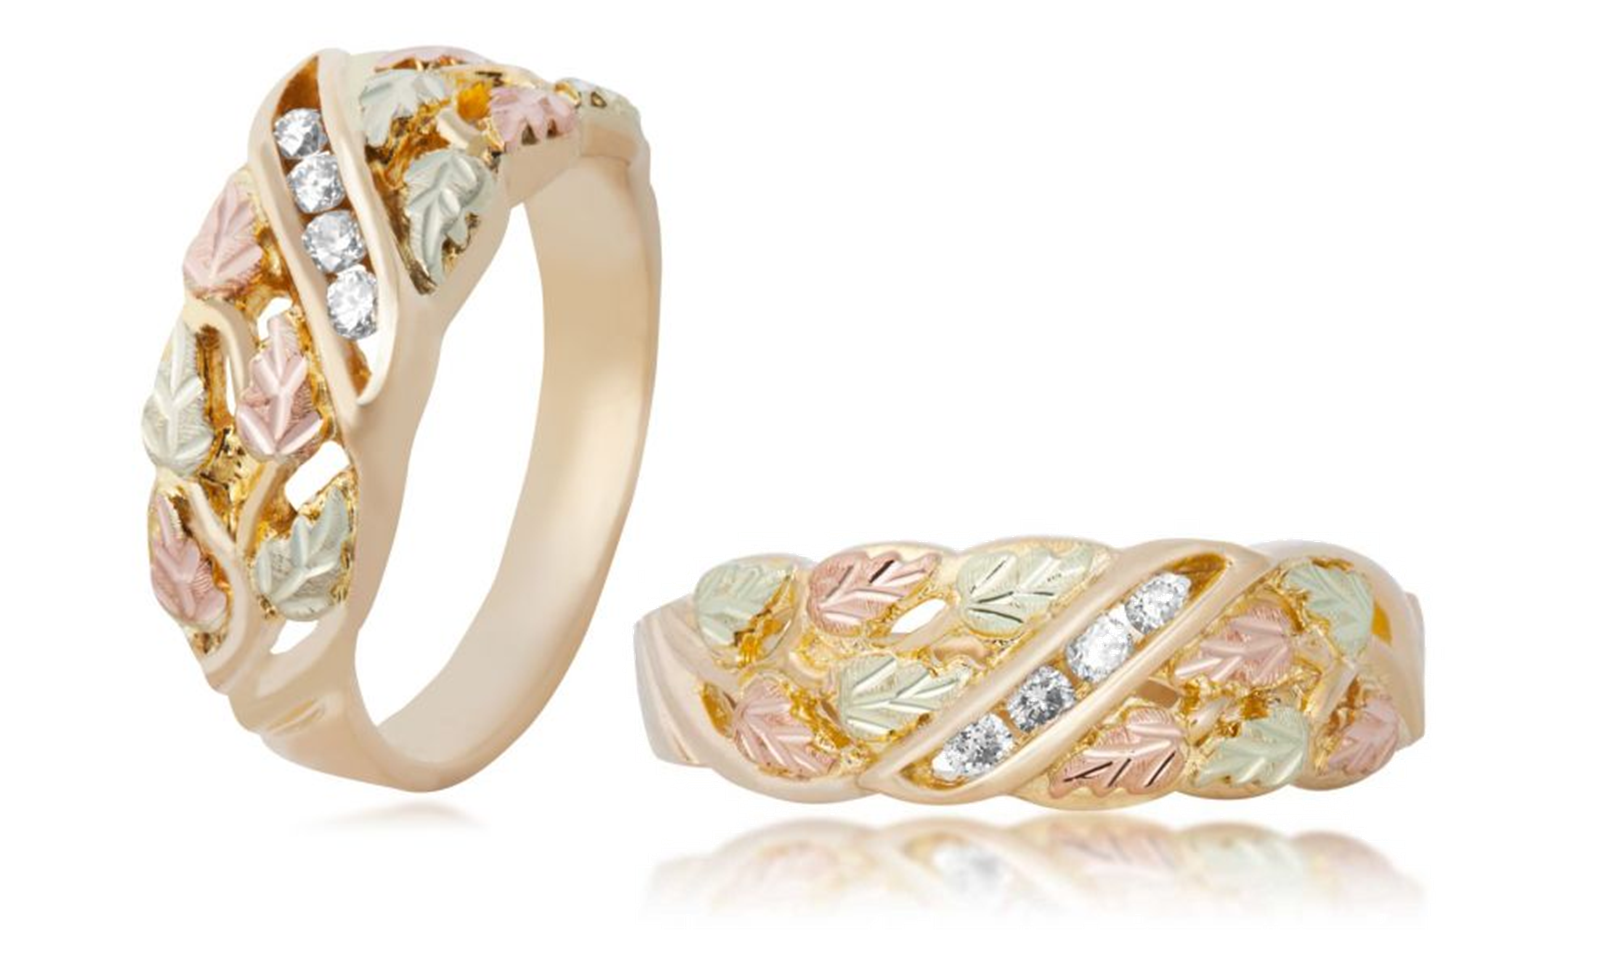 Each wedding band contains 4 diamonds; bands are crafted in 10k yellow gold, 12k rose gold, 12k green gold.